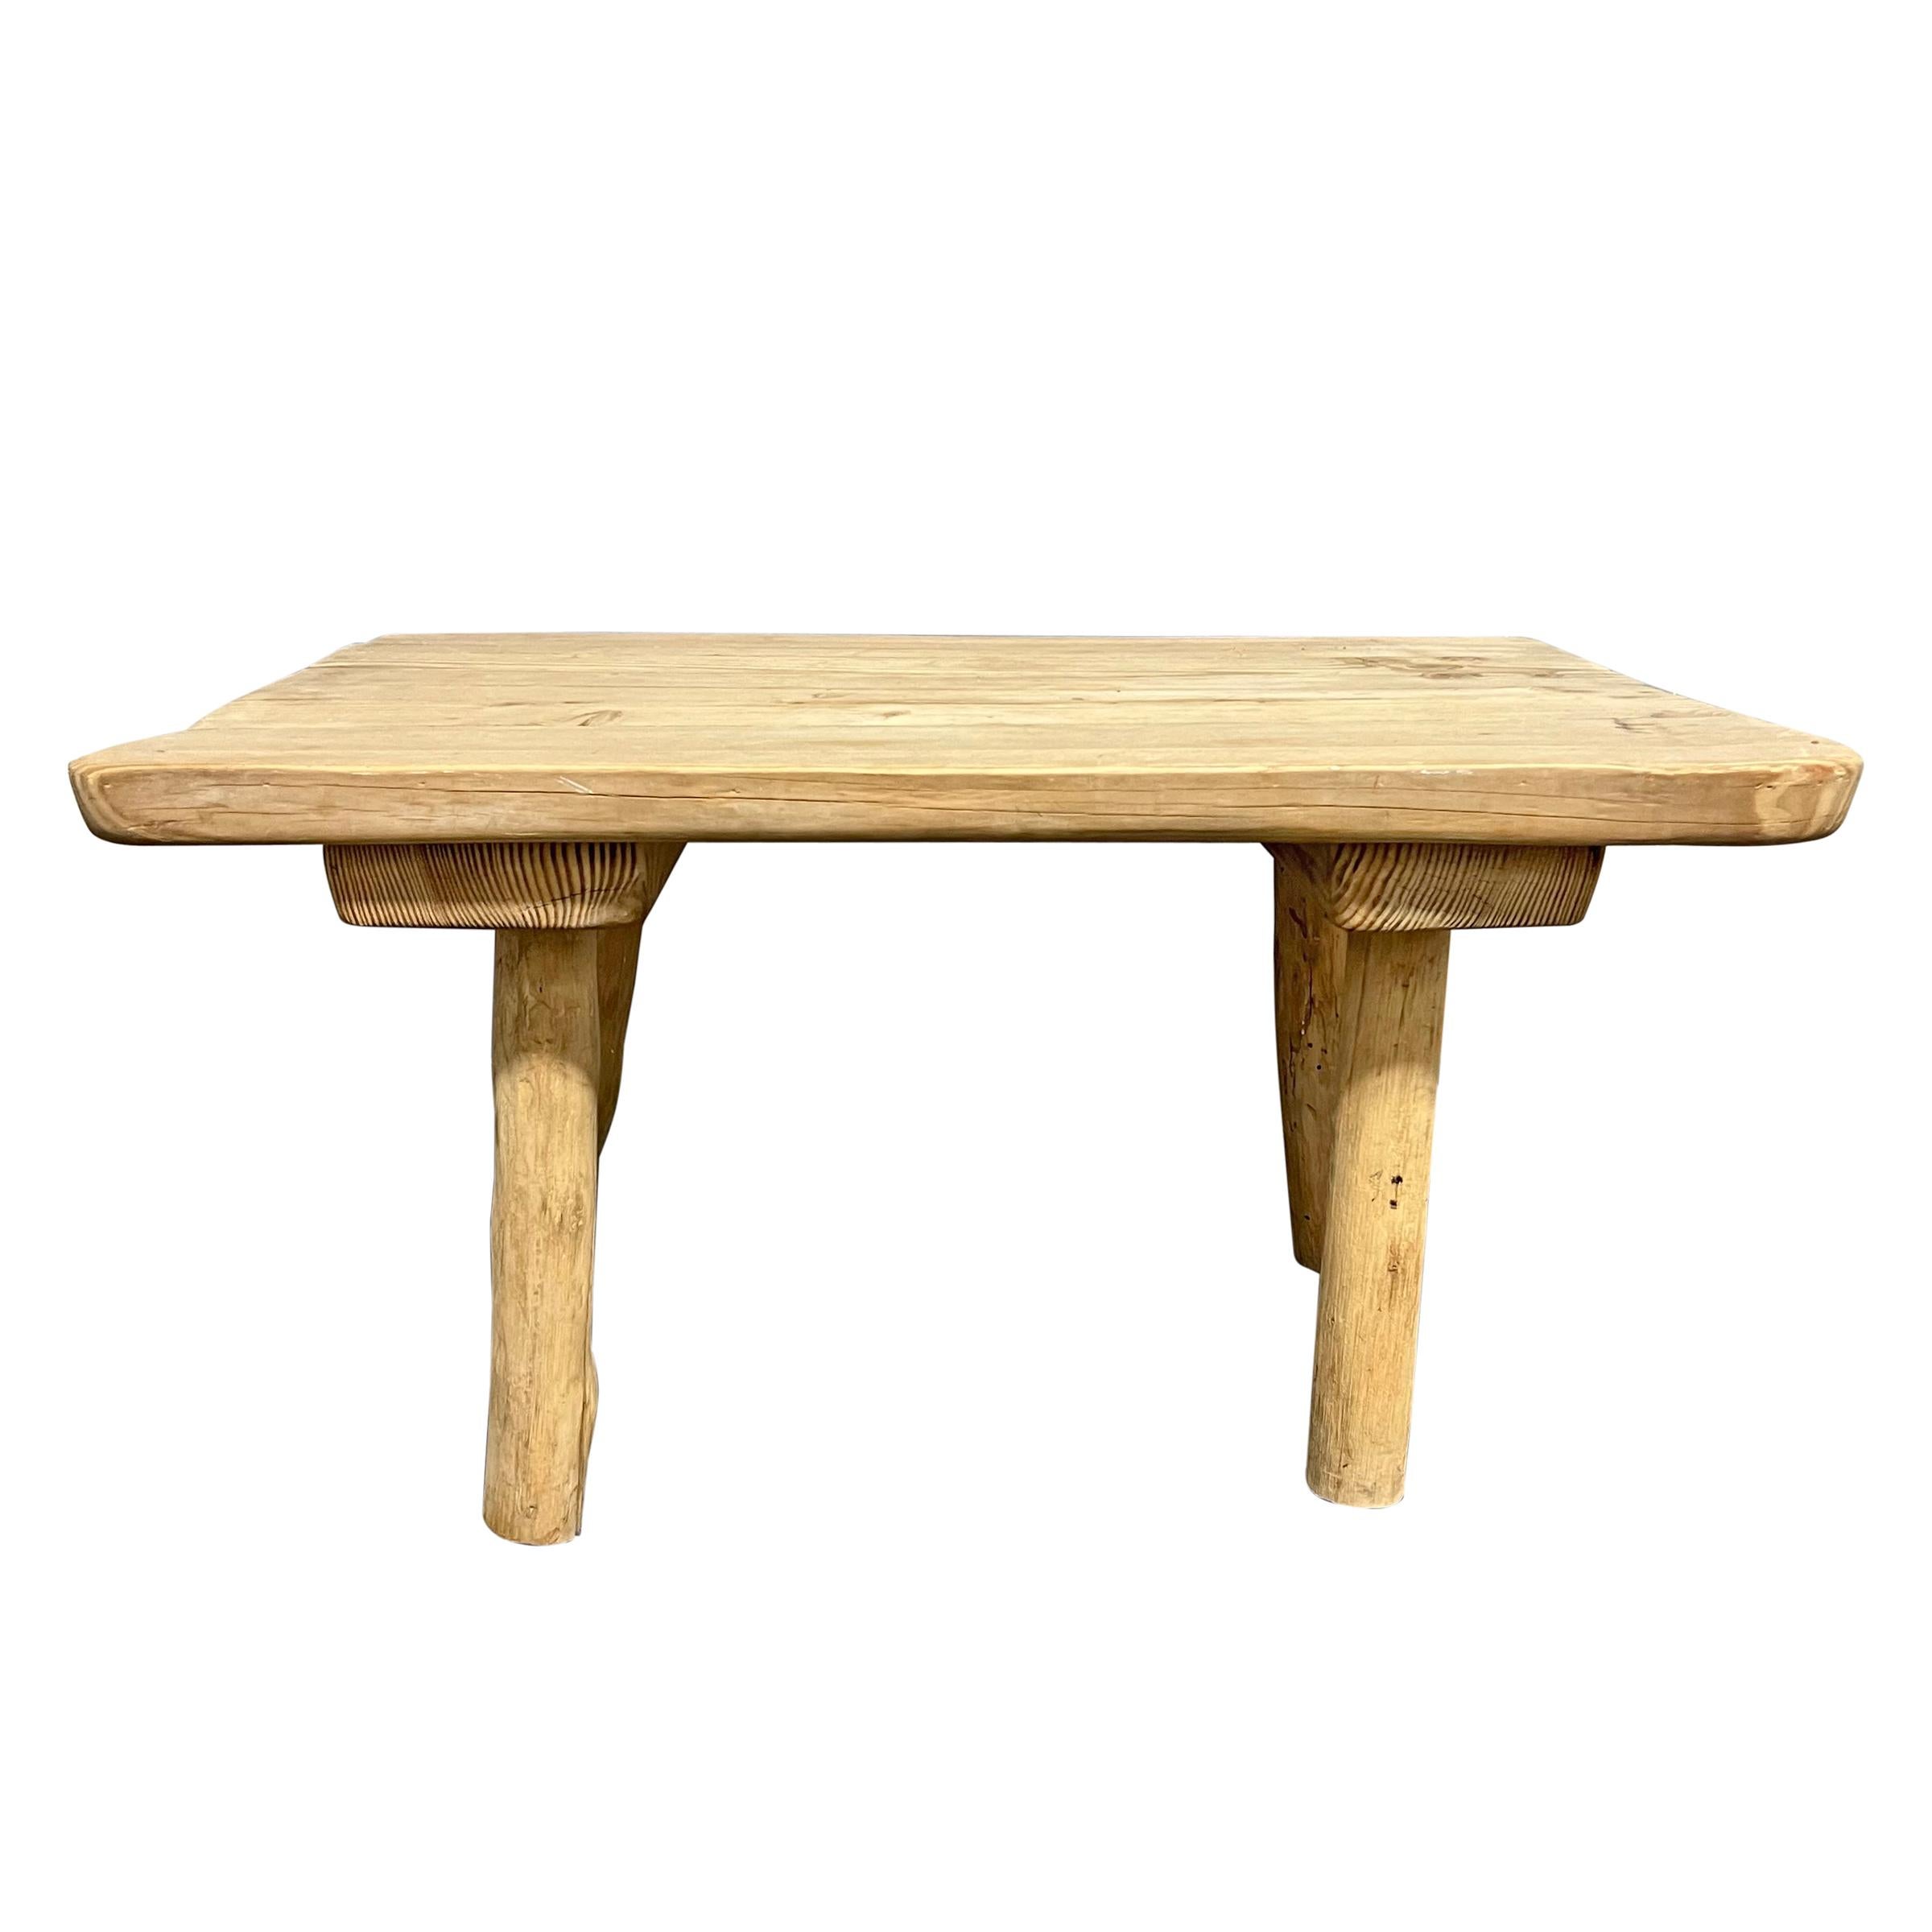 Hand-Crafted Mid-20th Century French Modernist Pine Low Table For Sale